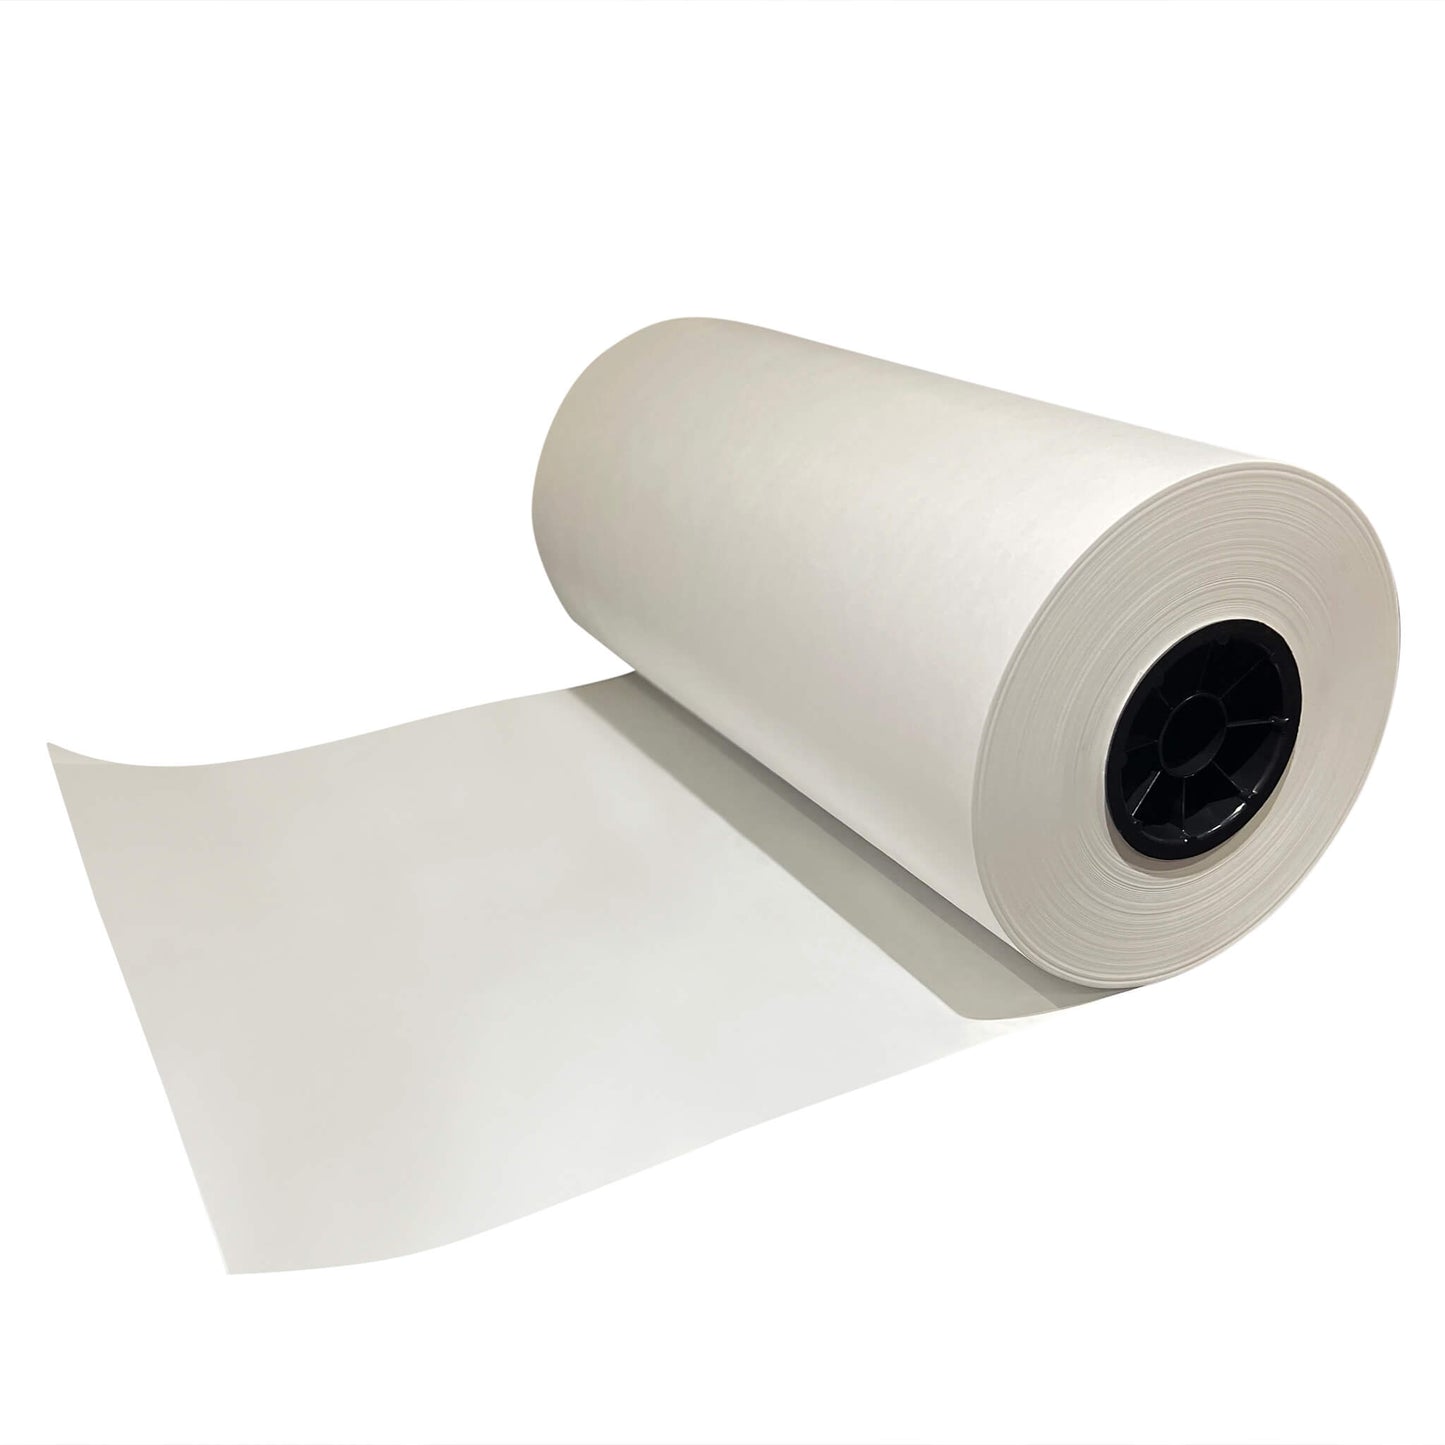 Bleached white butcher paper roll.